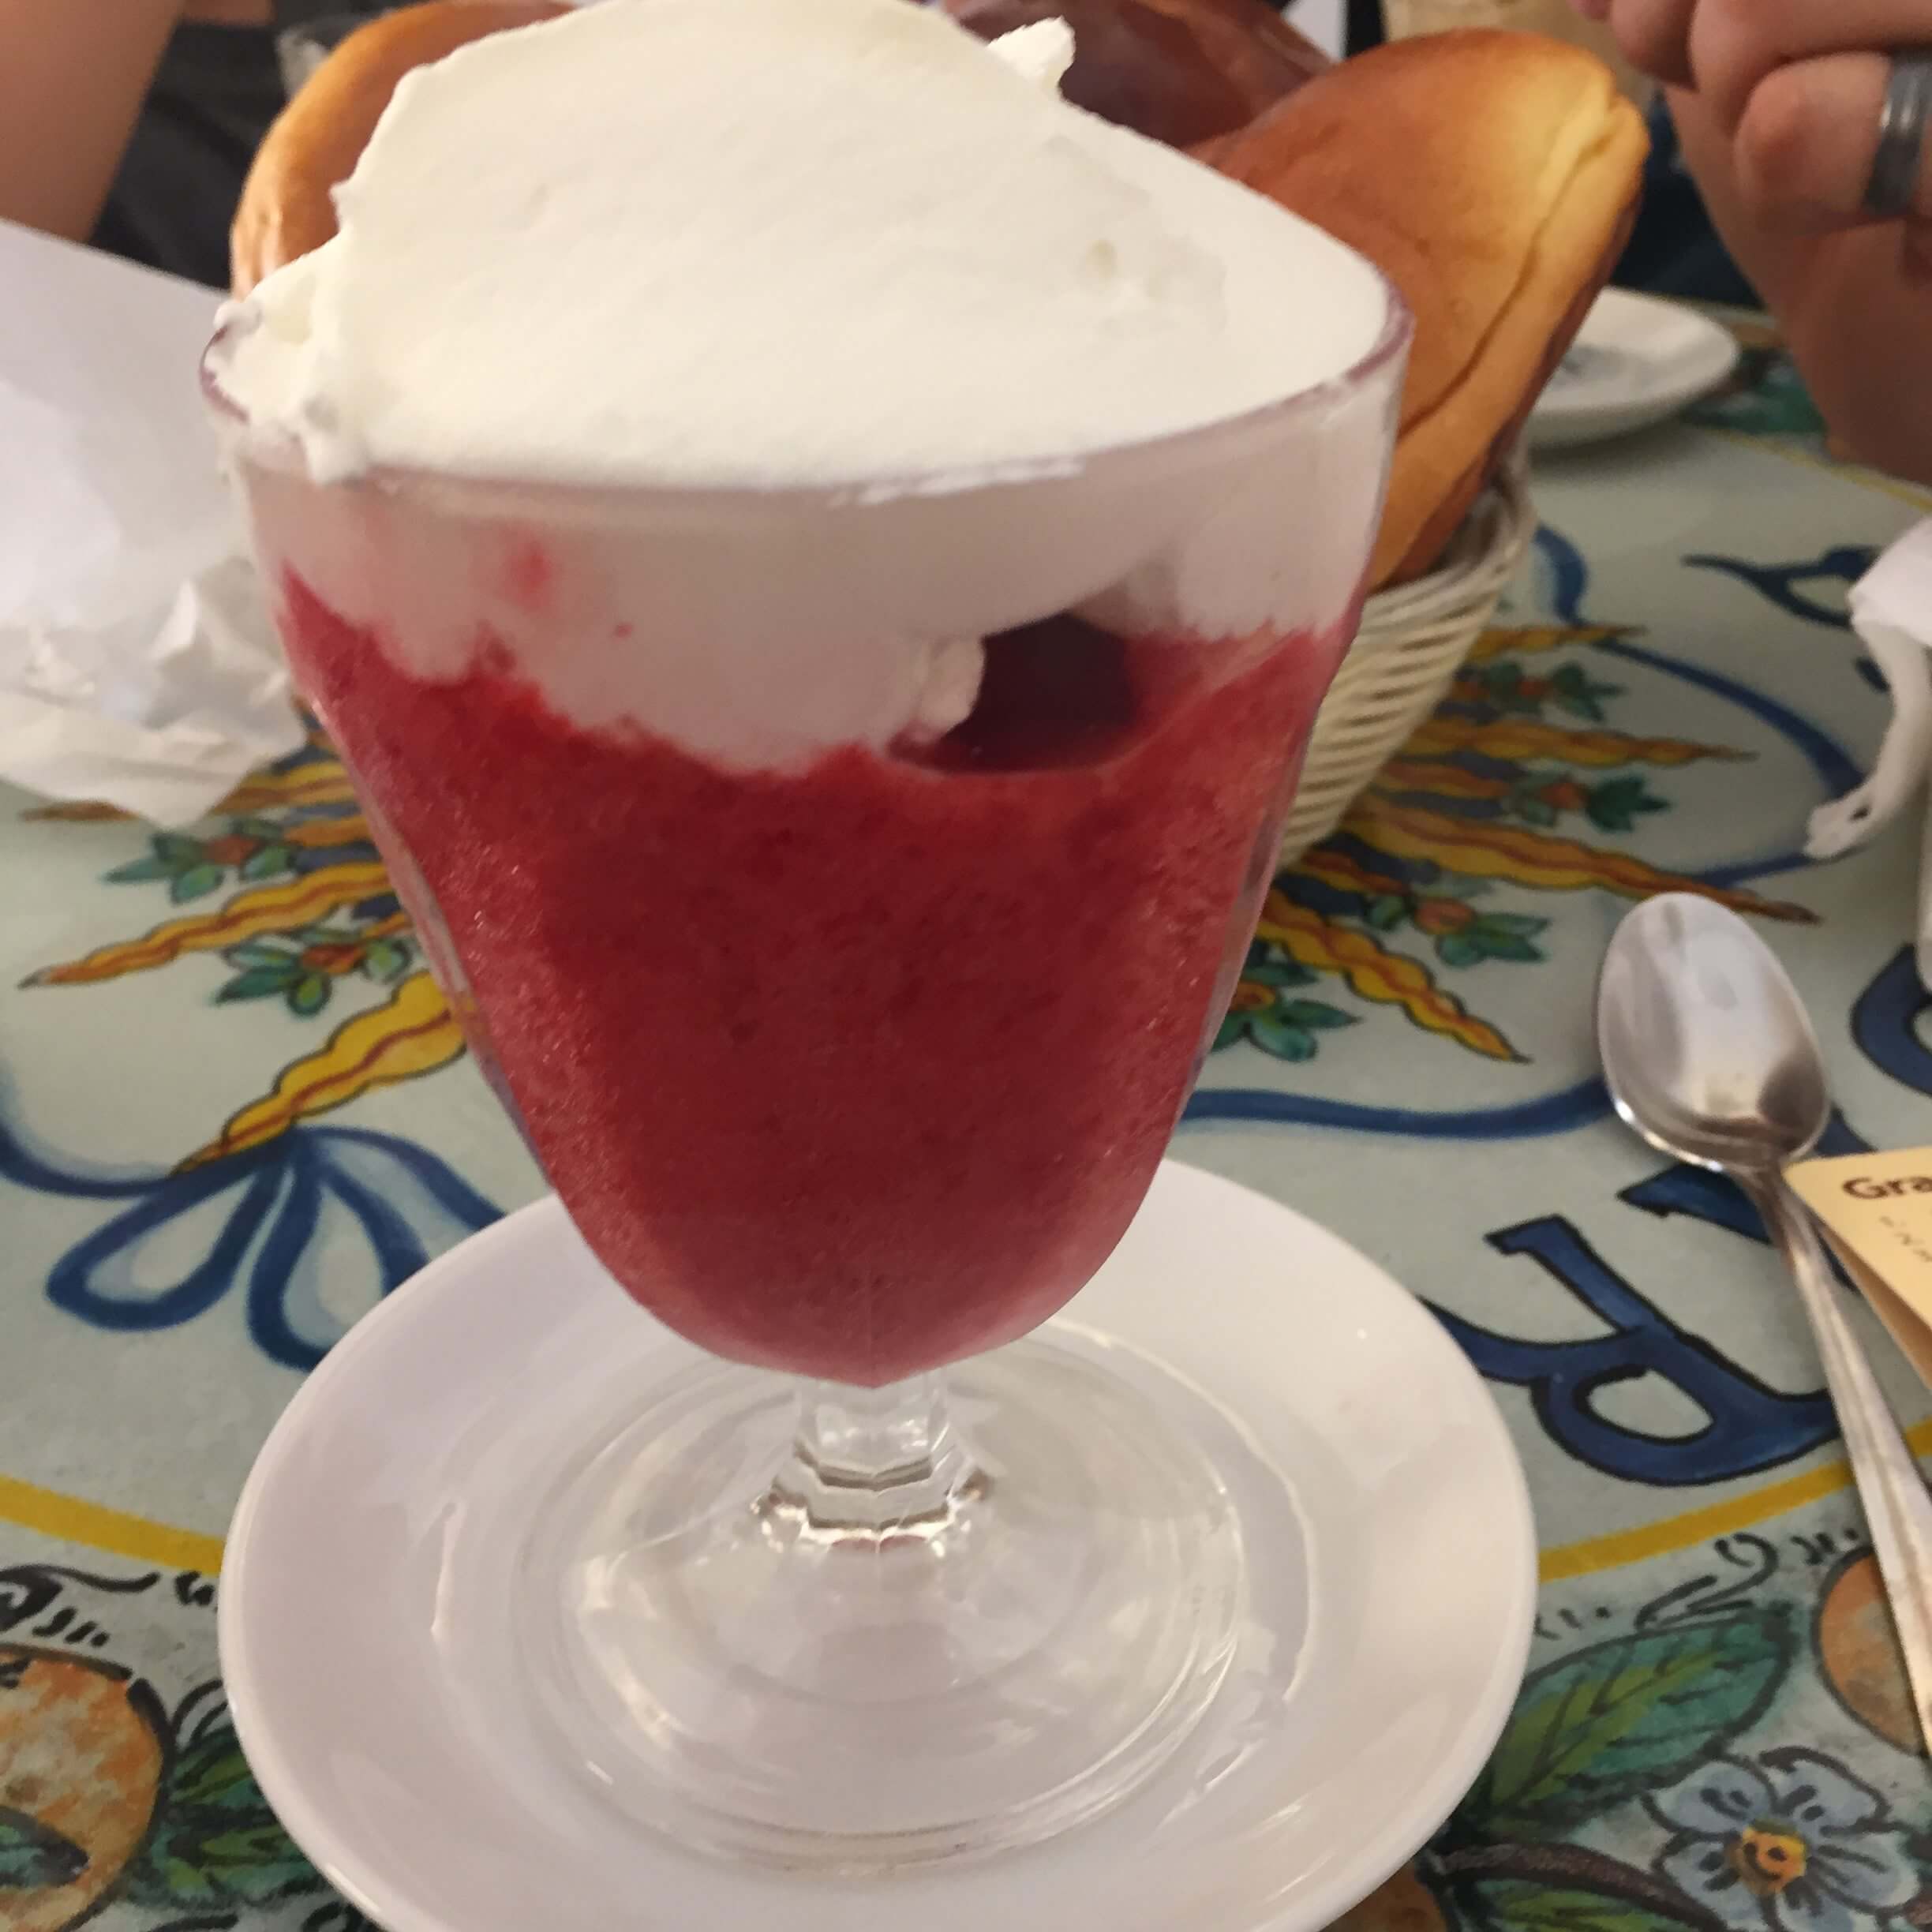 Reasons to go plan a family holiday in Sicily: granita